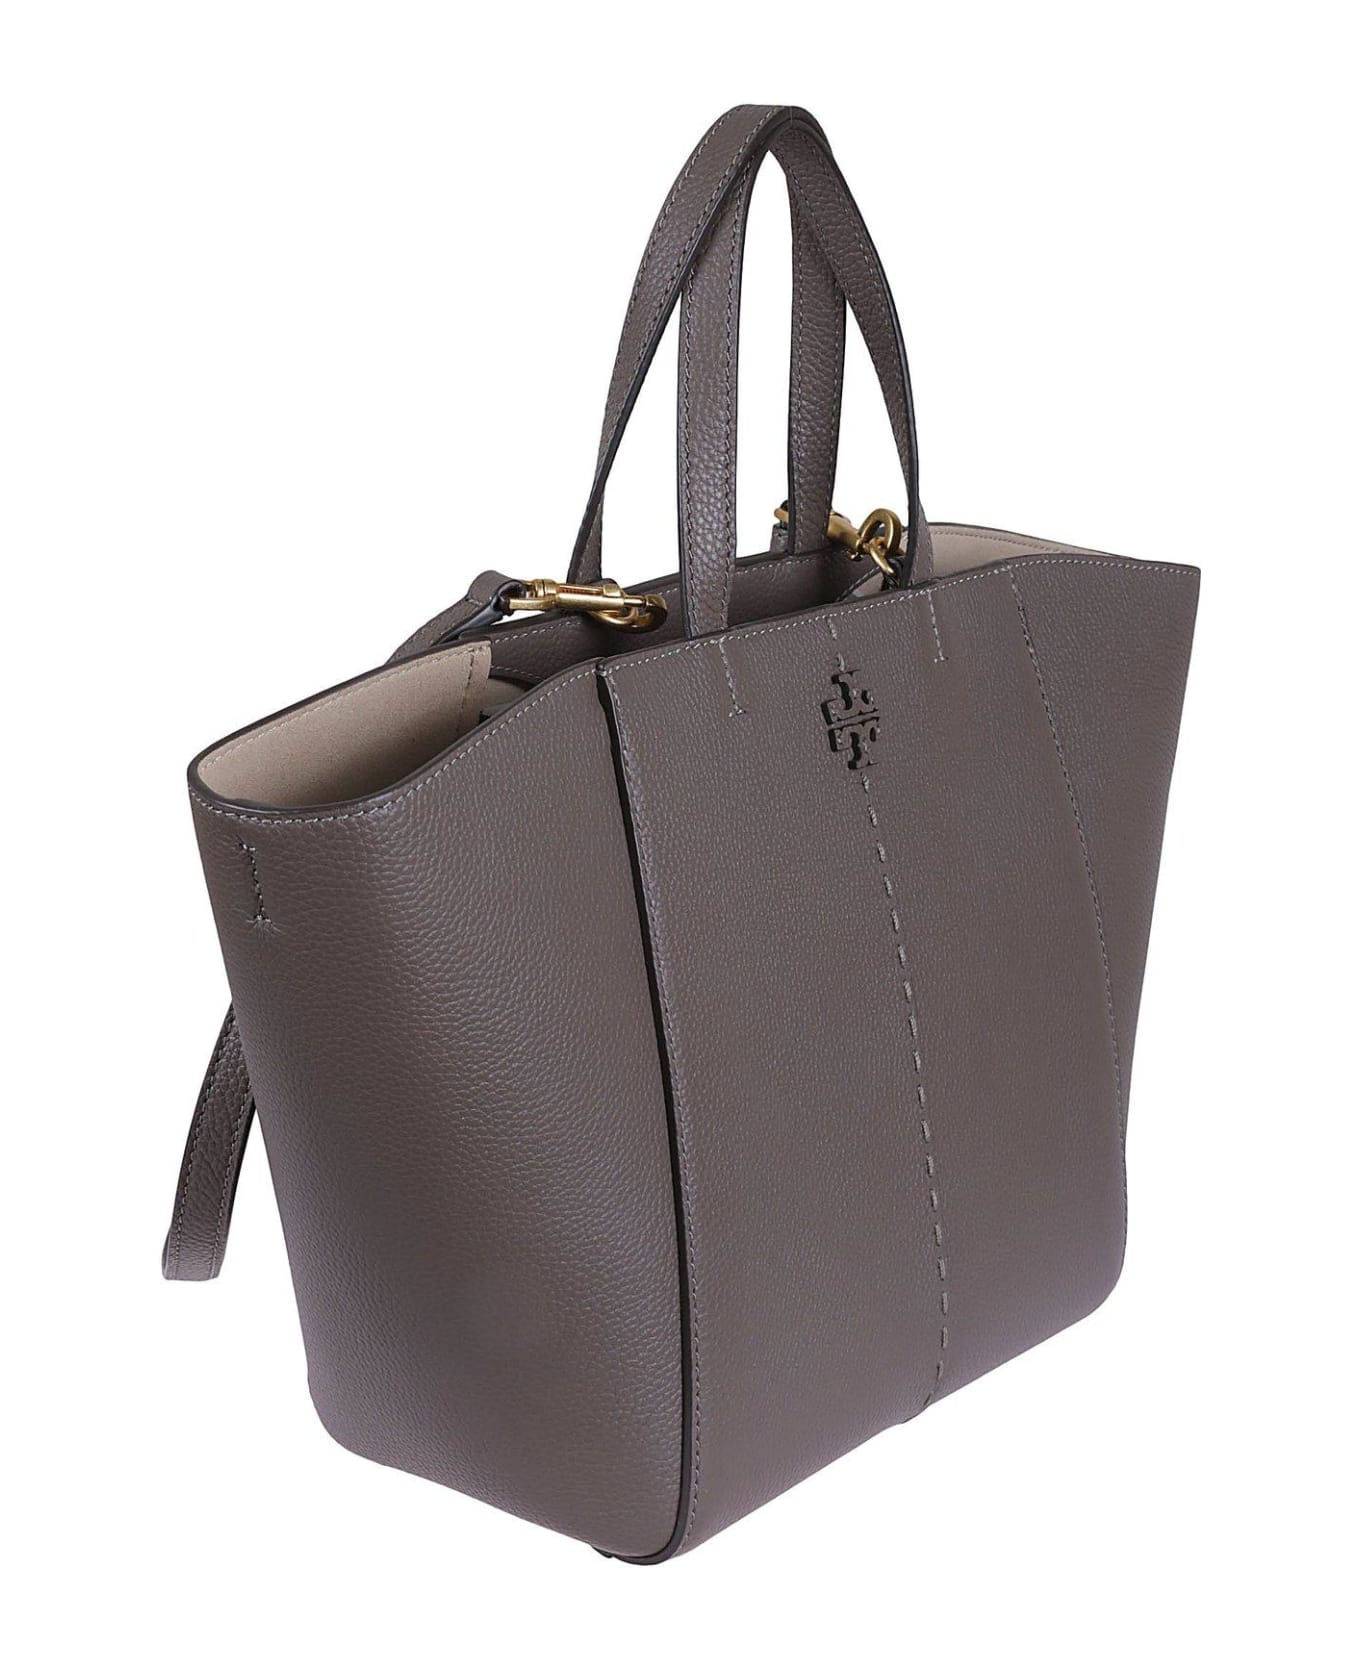 Tory Burch Double T Tote Bag - Silver Maple トートバッグ